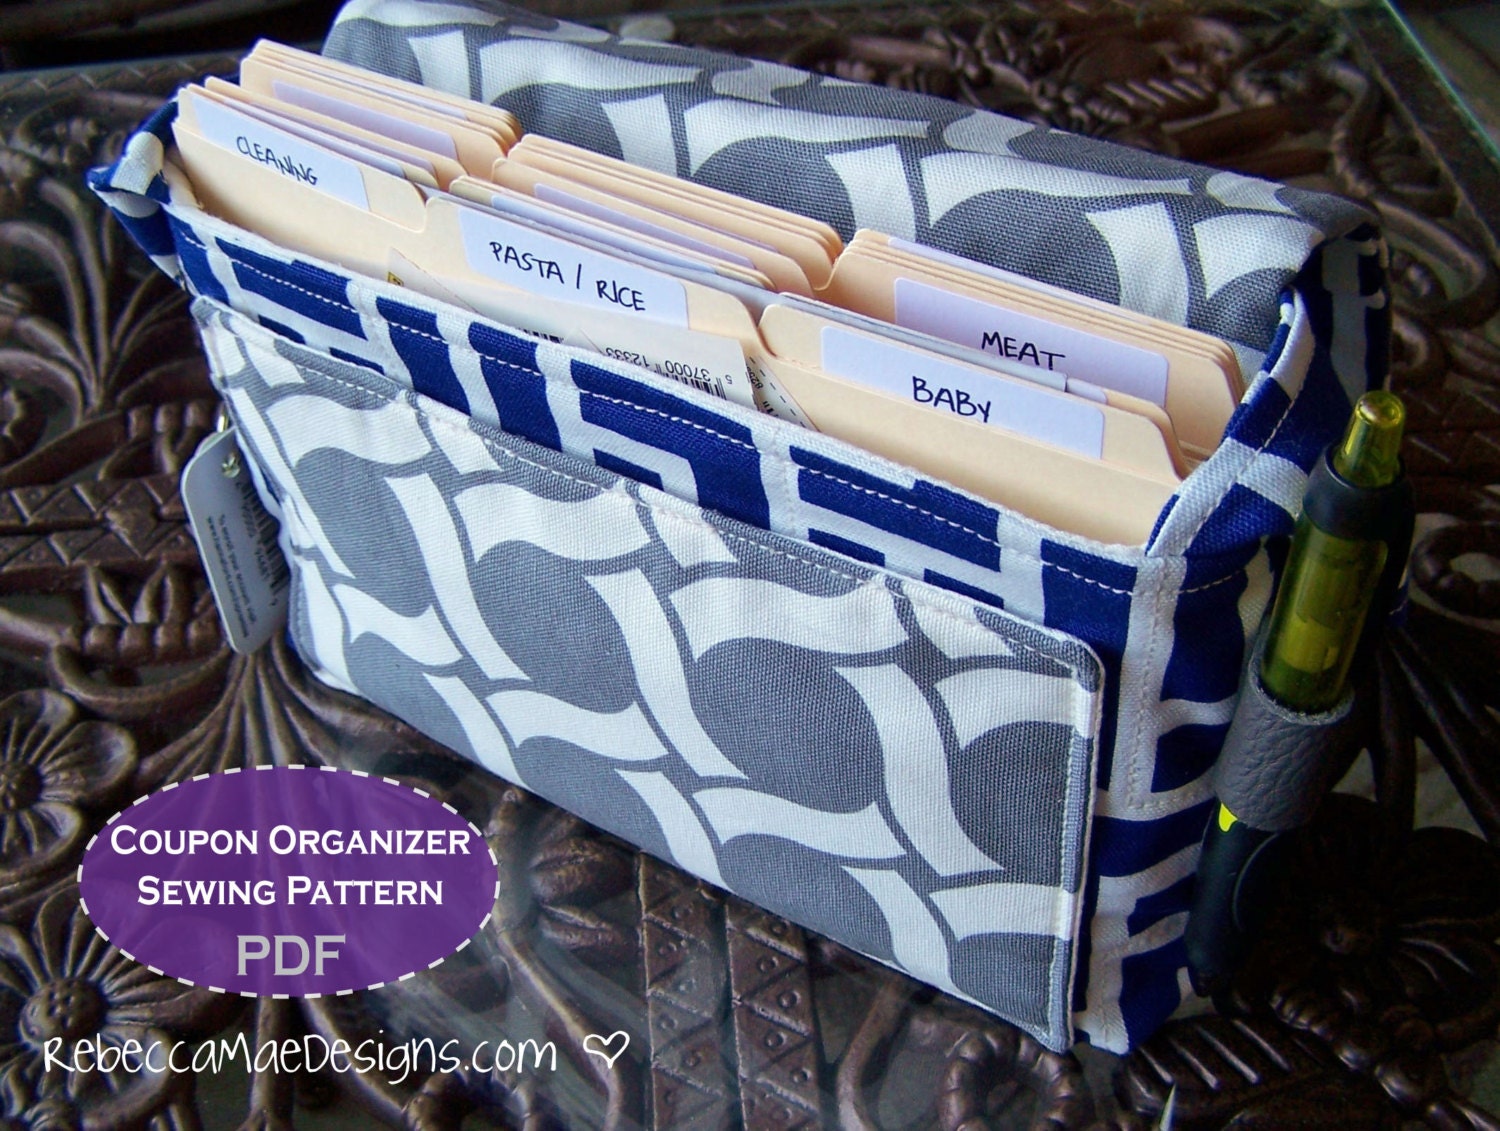 PATTERN Quilted Coupon Organizer - DiY PDF sewing pattern for coupon holder from ...